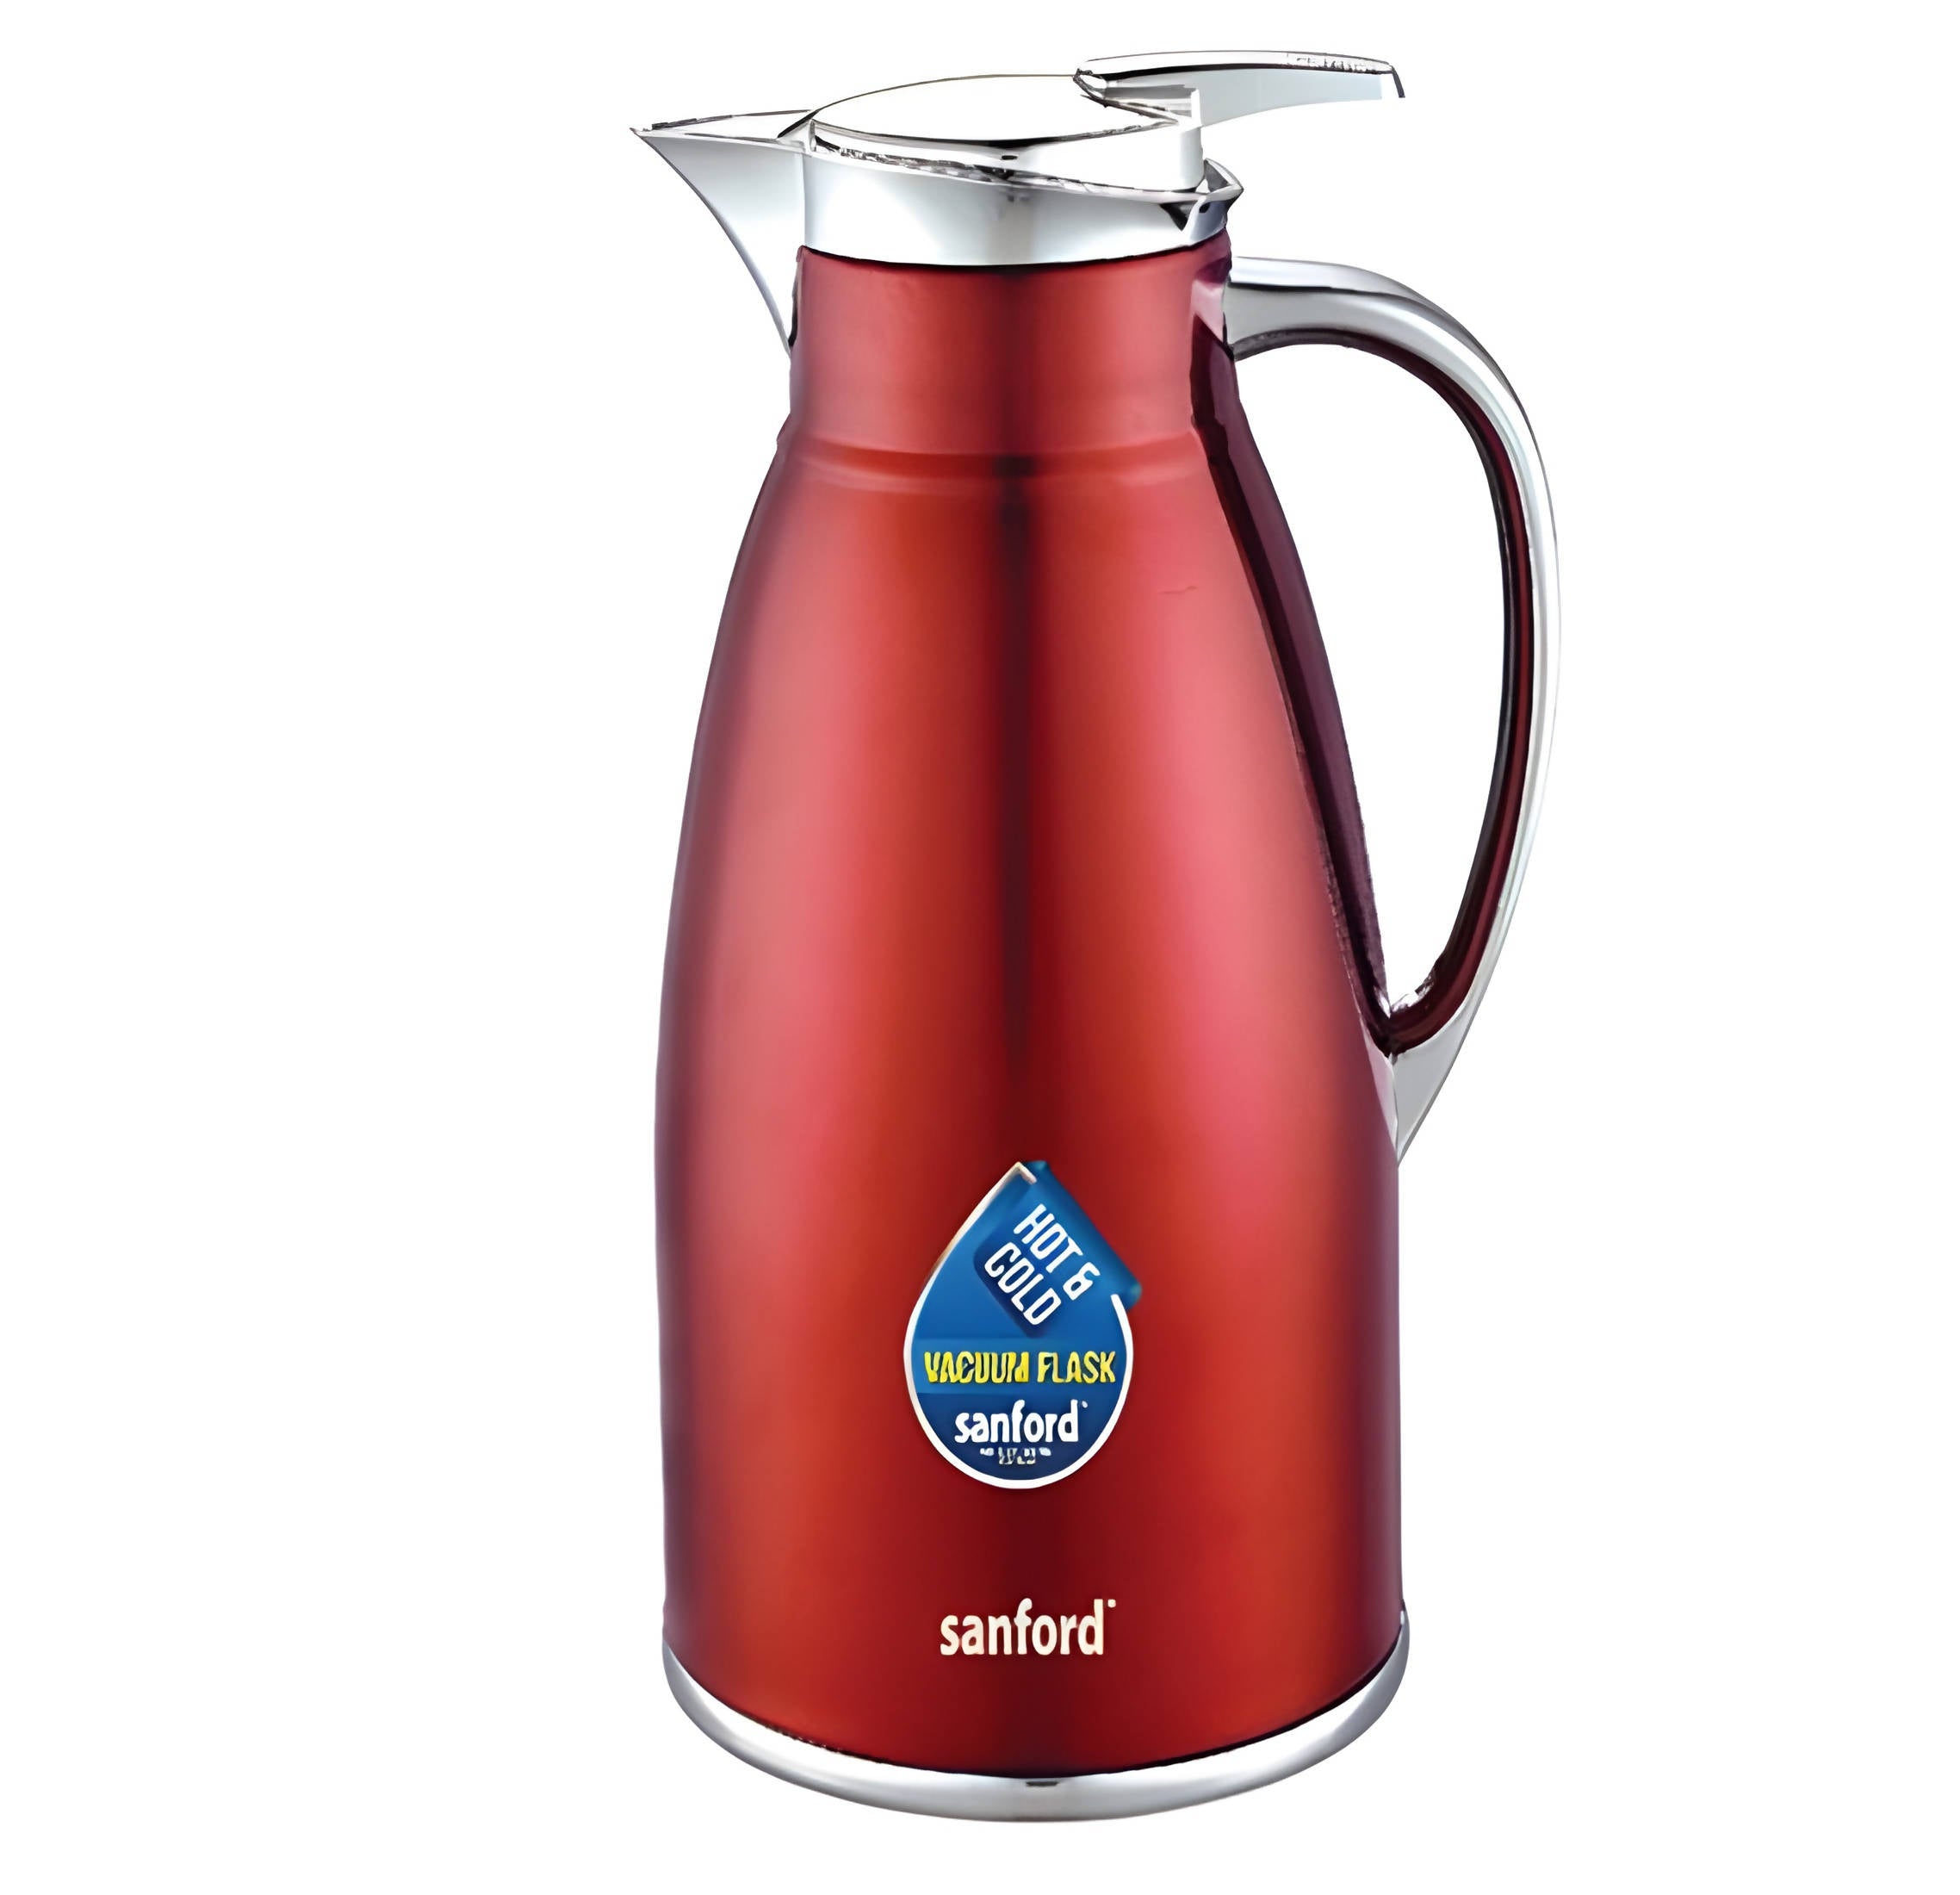 Sanford Vacuum Flask Stainless Steel 1.6L Red